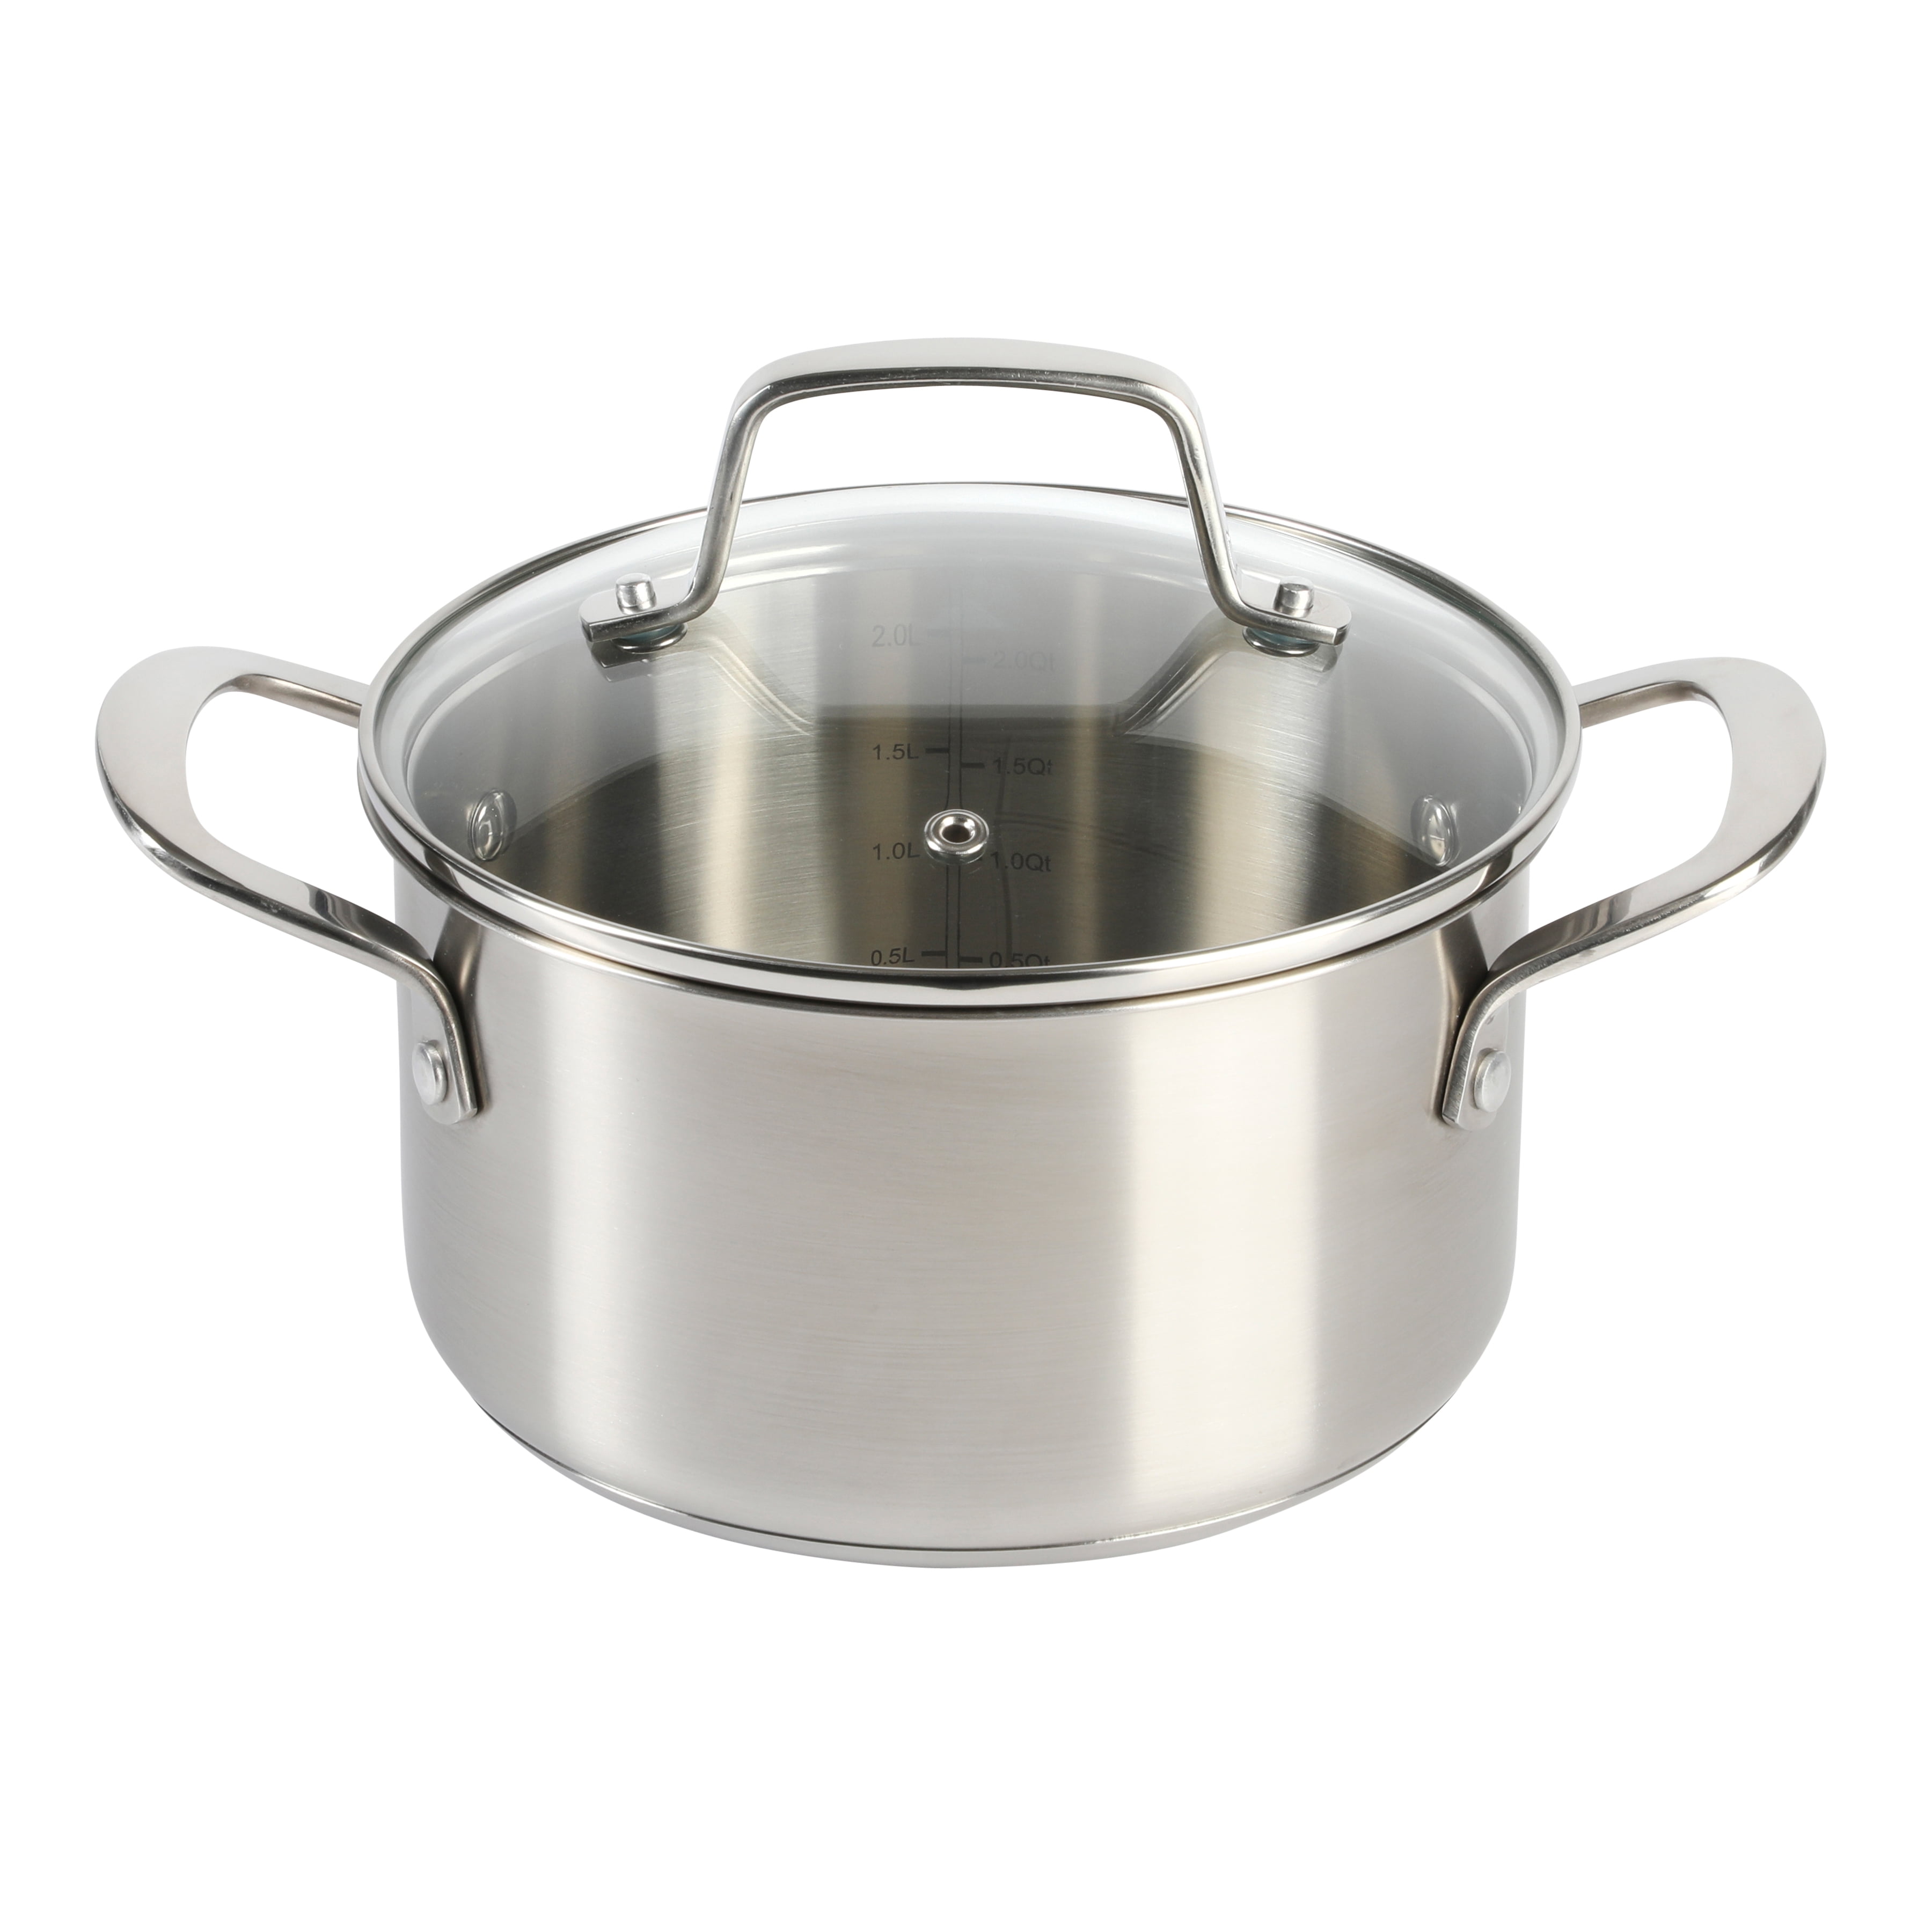 Super Sale. Le Chef 5-ply Stainless Steel Dutch Oven 5-qt 